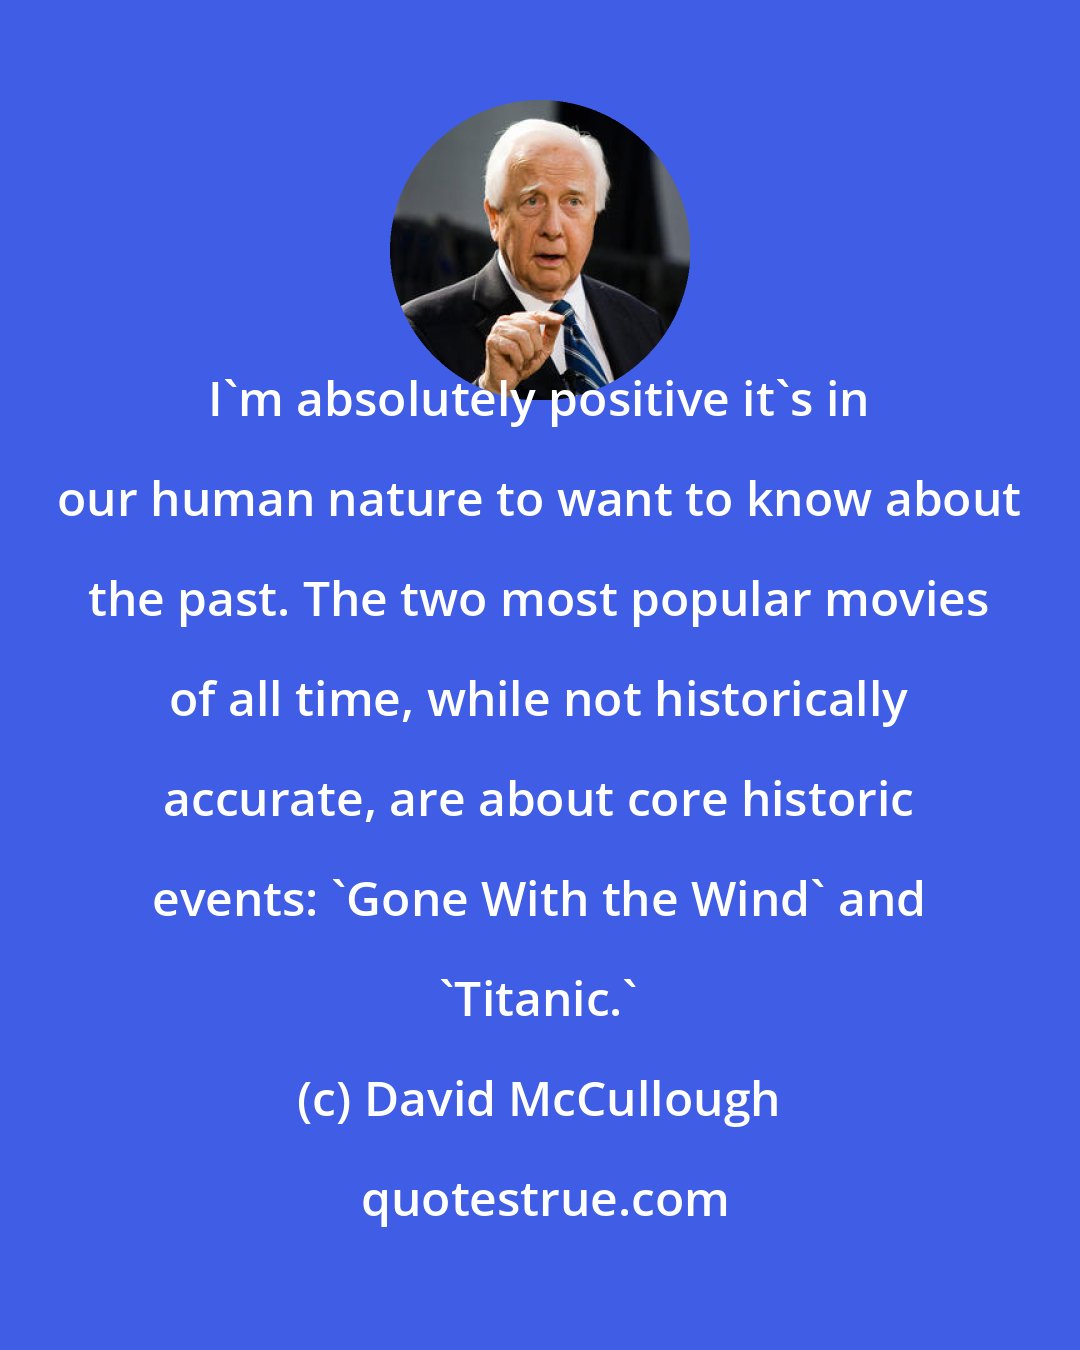 David McCullough: I'm absolutely positive it's in our human nature to want to know about the past. The two most popular movies of all time, while not historically accurate, are about core historic events: 'Gone With the Wind' and 'Titanic.'